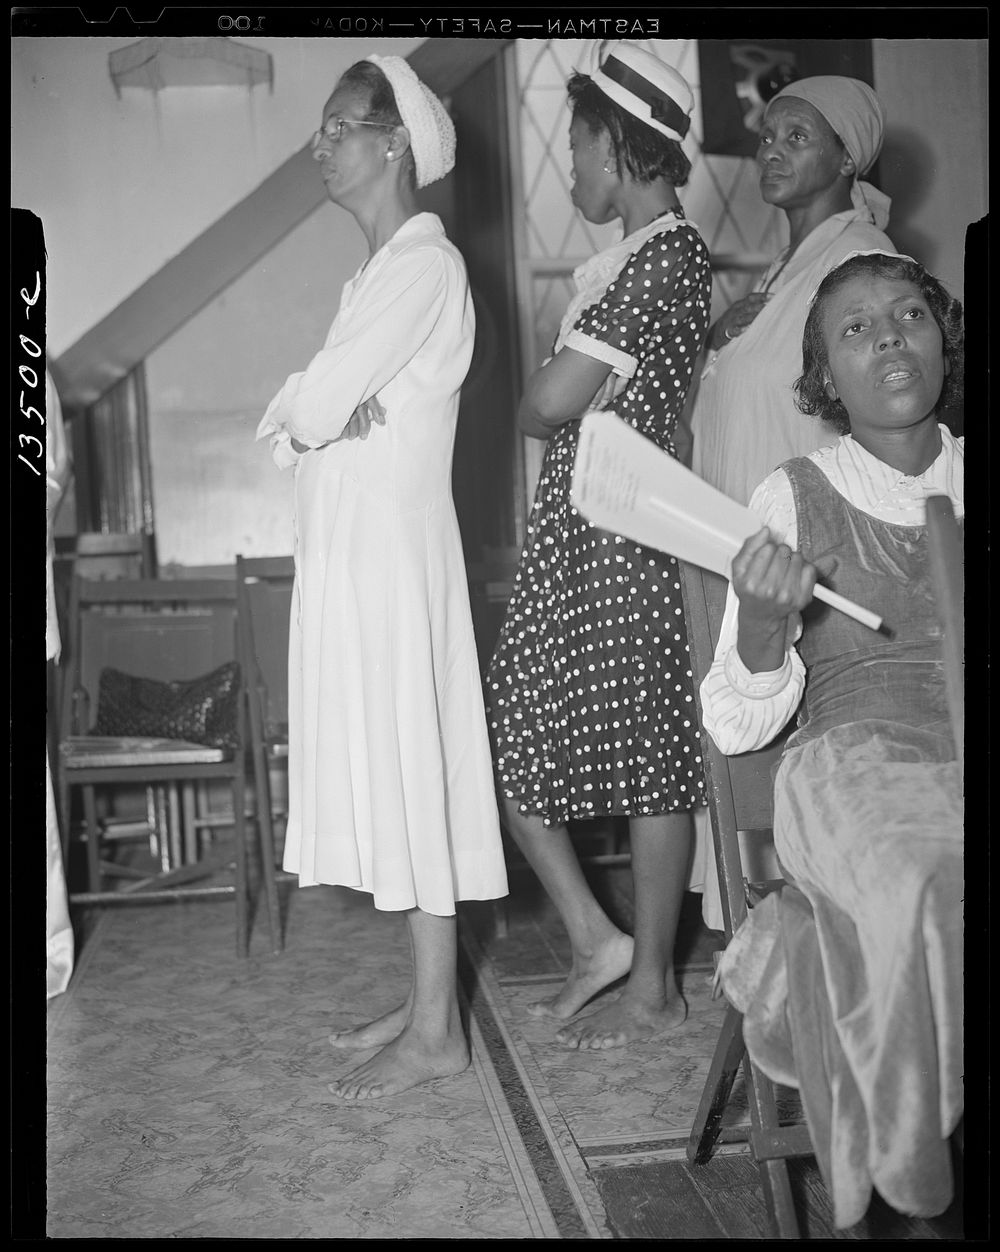 Washington, D.C. As in Moses' time, members of the St. Martins Spiritual Church remove their shoes during the annual "flower…